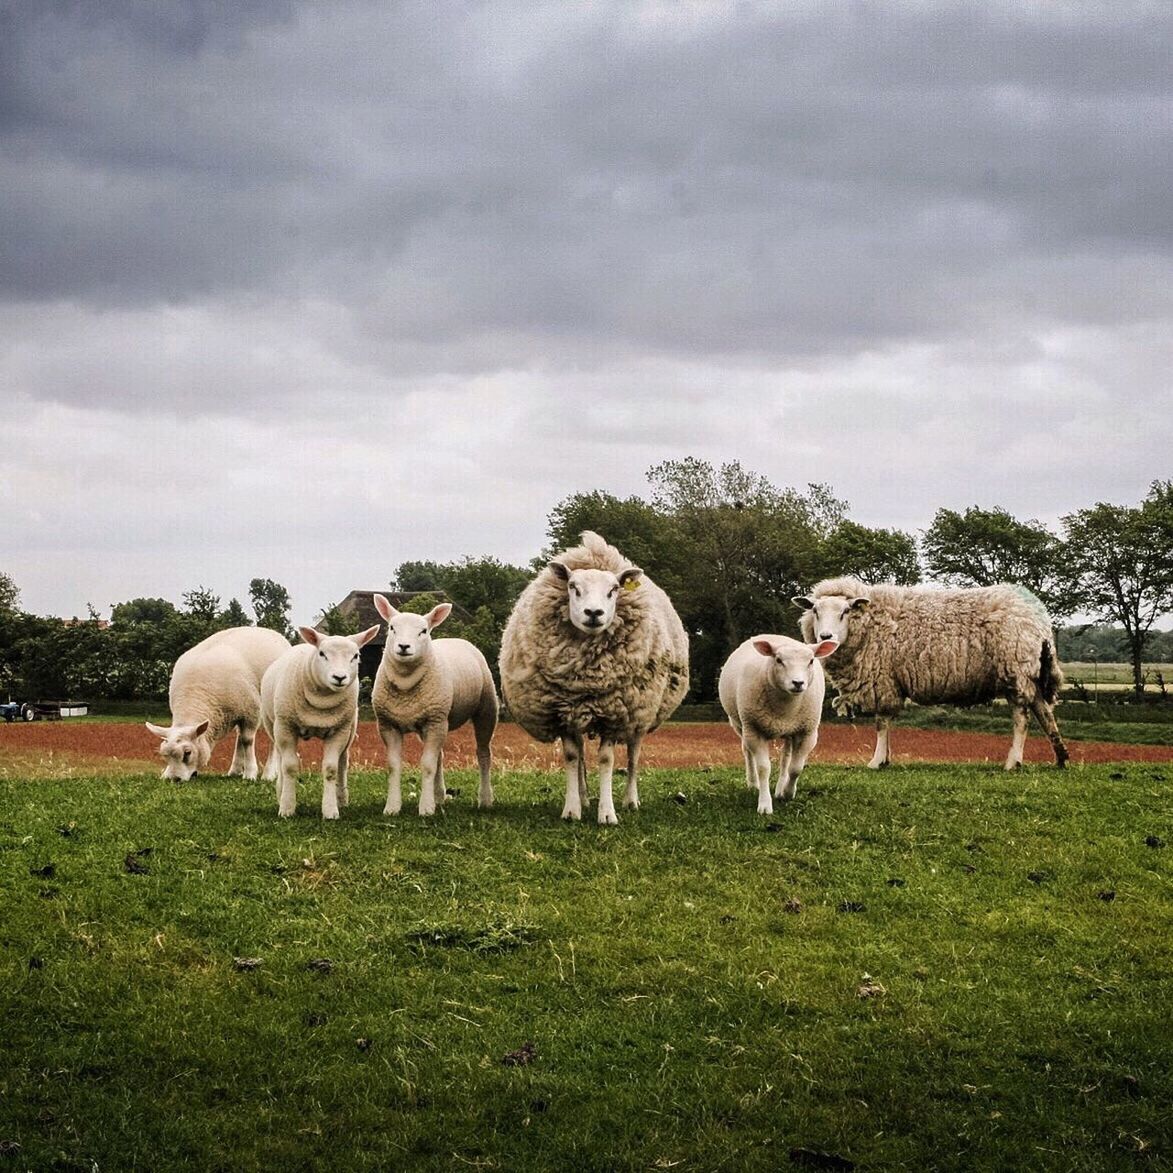 Sheep grazing on grassy field against cloudy sky